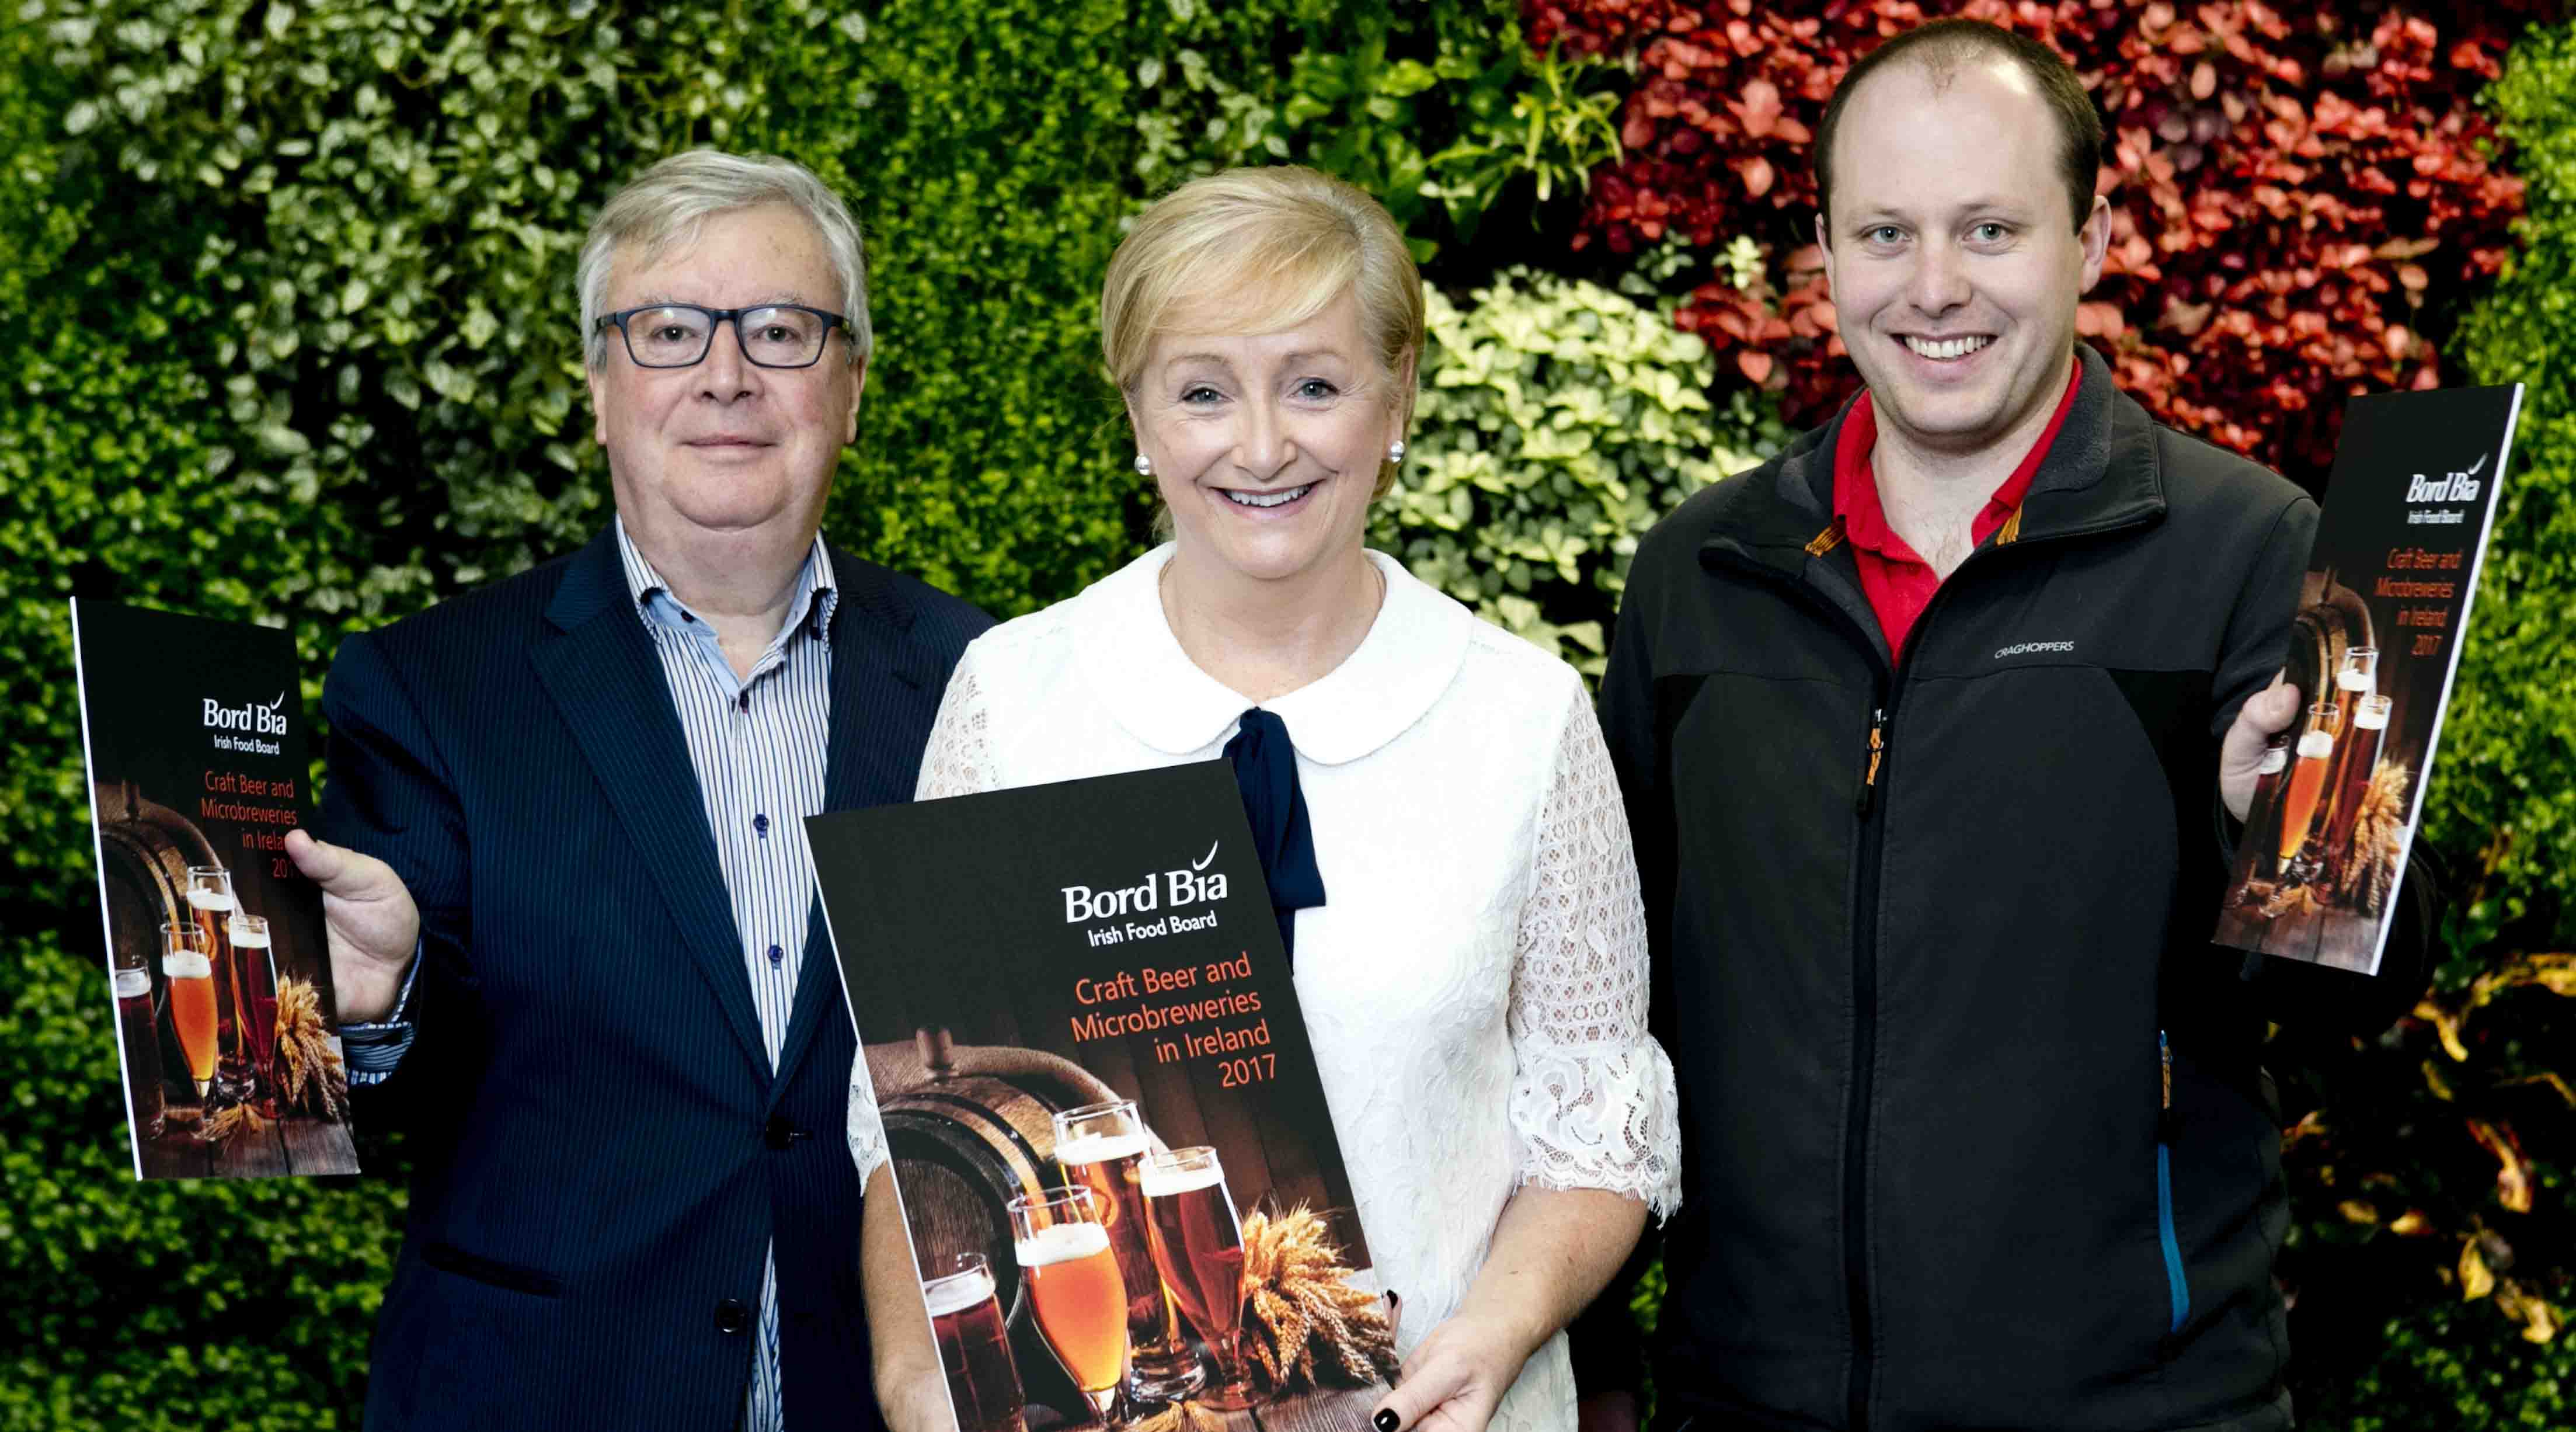 At the launch of the new Craft Beer report (from left): Economist Bernard Feeney, Bord Bia’s Beverage Sectoral Manager Denise Murphy and the Chairman of Independent Craft Brewers Ireland Kevin O'Hara.